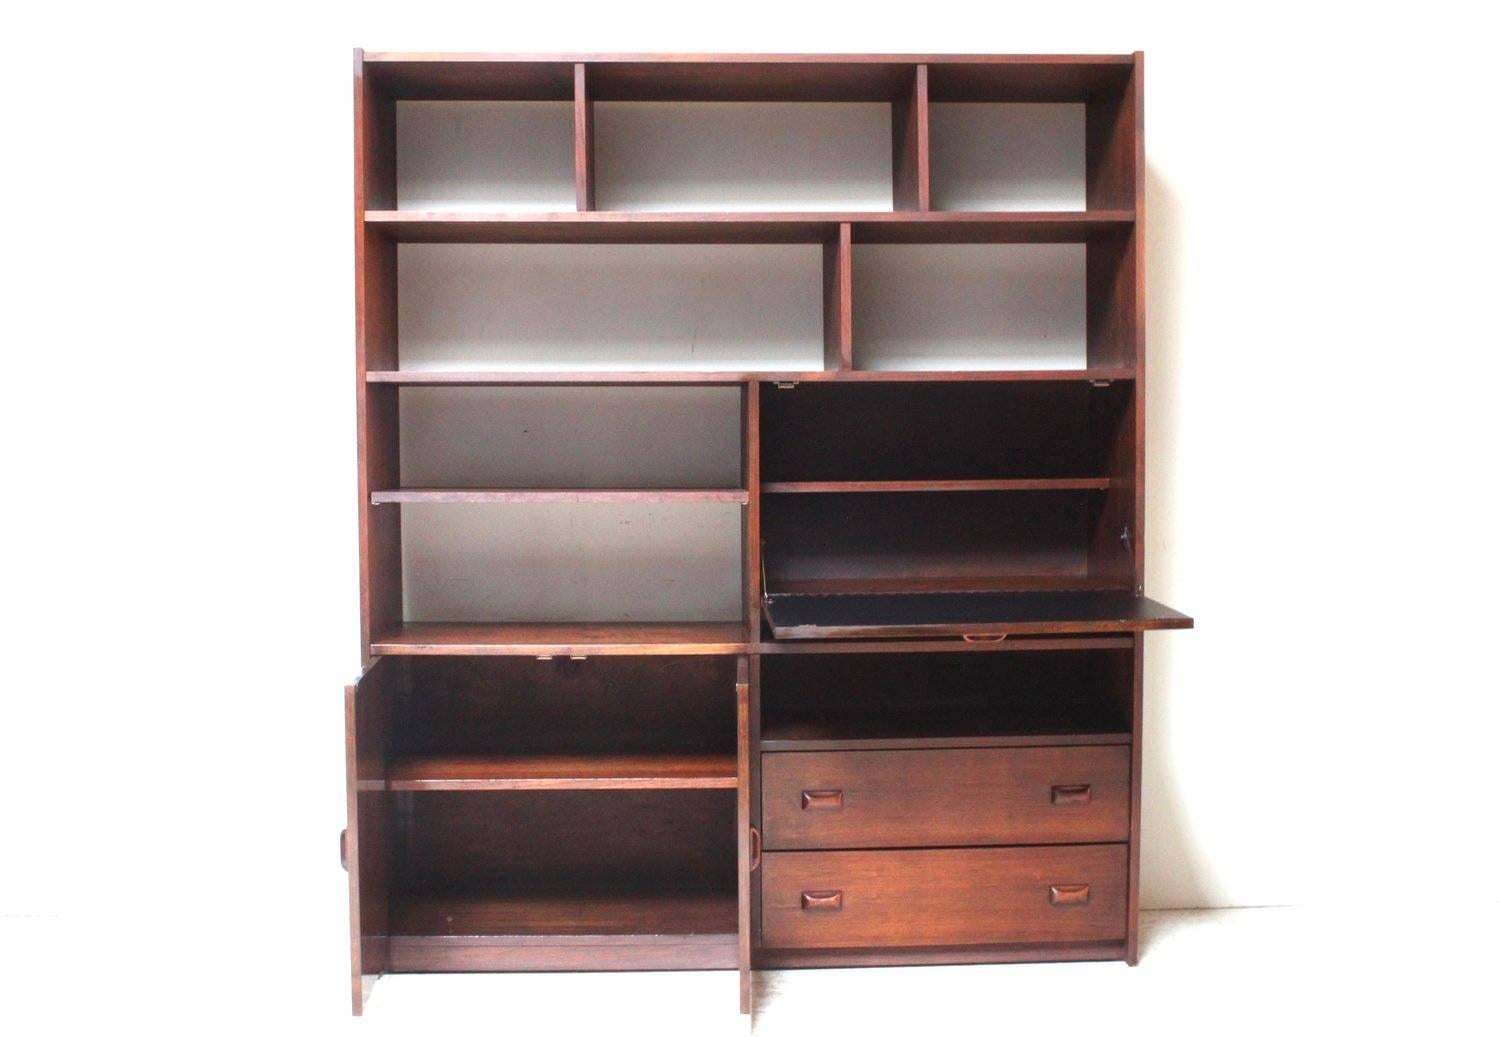 A very nice walnut wall unit with a drop front bar/secretary desk on right. Among a generous amount of open shelf space is a cabinet on the lower left with two drawers on the right.